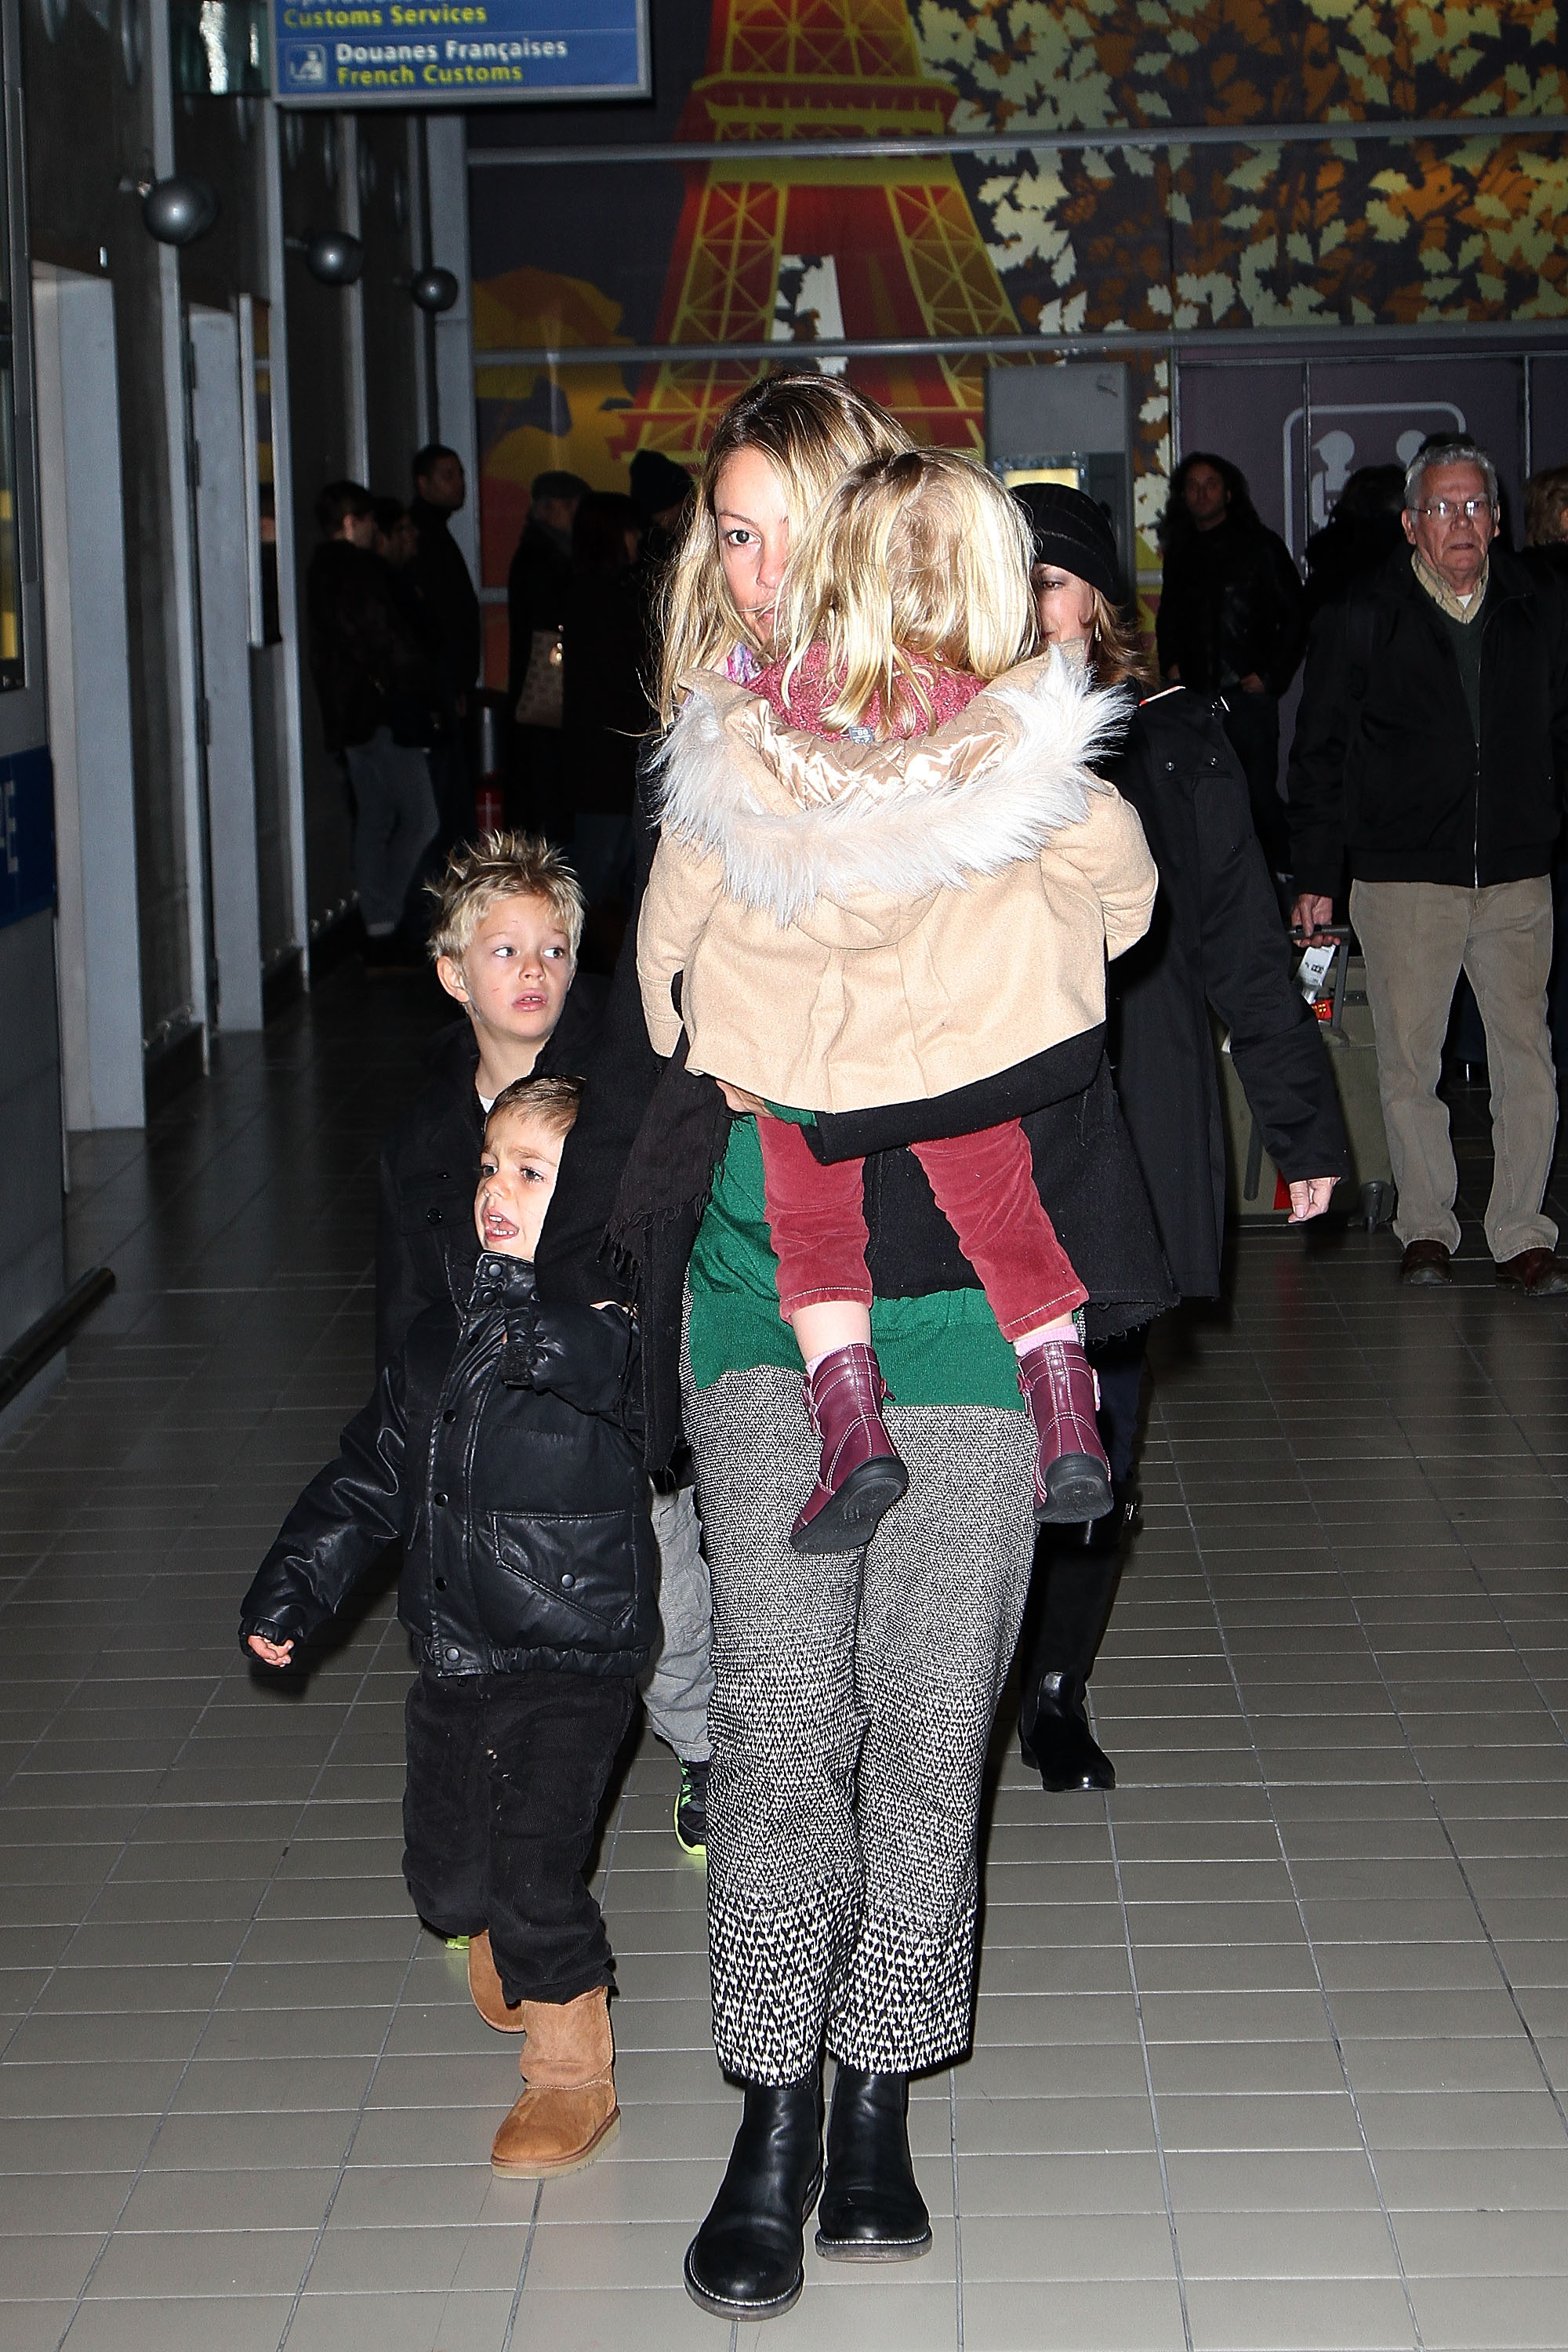 Christine Baumgartner, her sons Hayes and Cayden and her daughter Grace Avery arrive at the Roissy airport on January 15, 2013 in Paris, France | Source: Getty Images